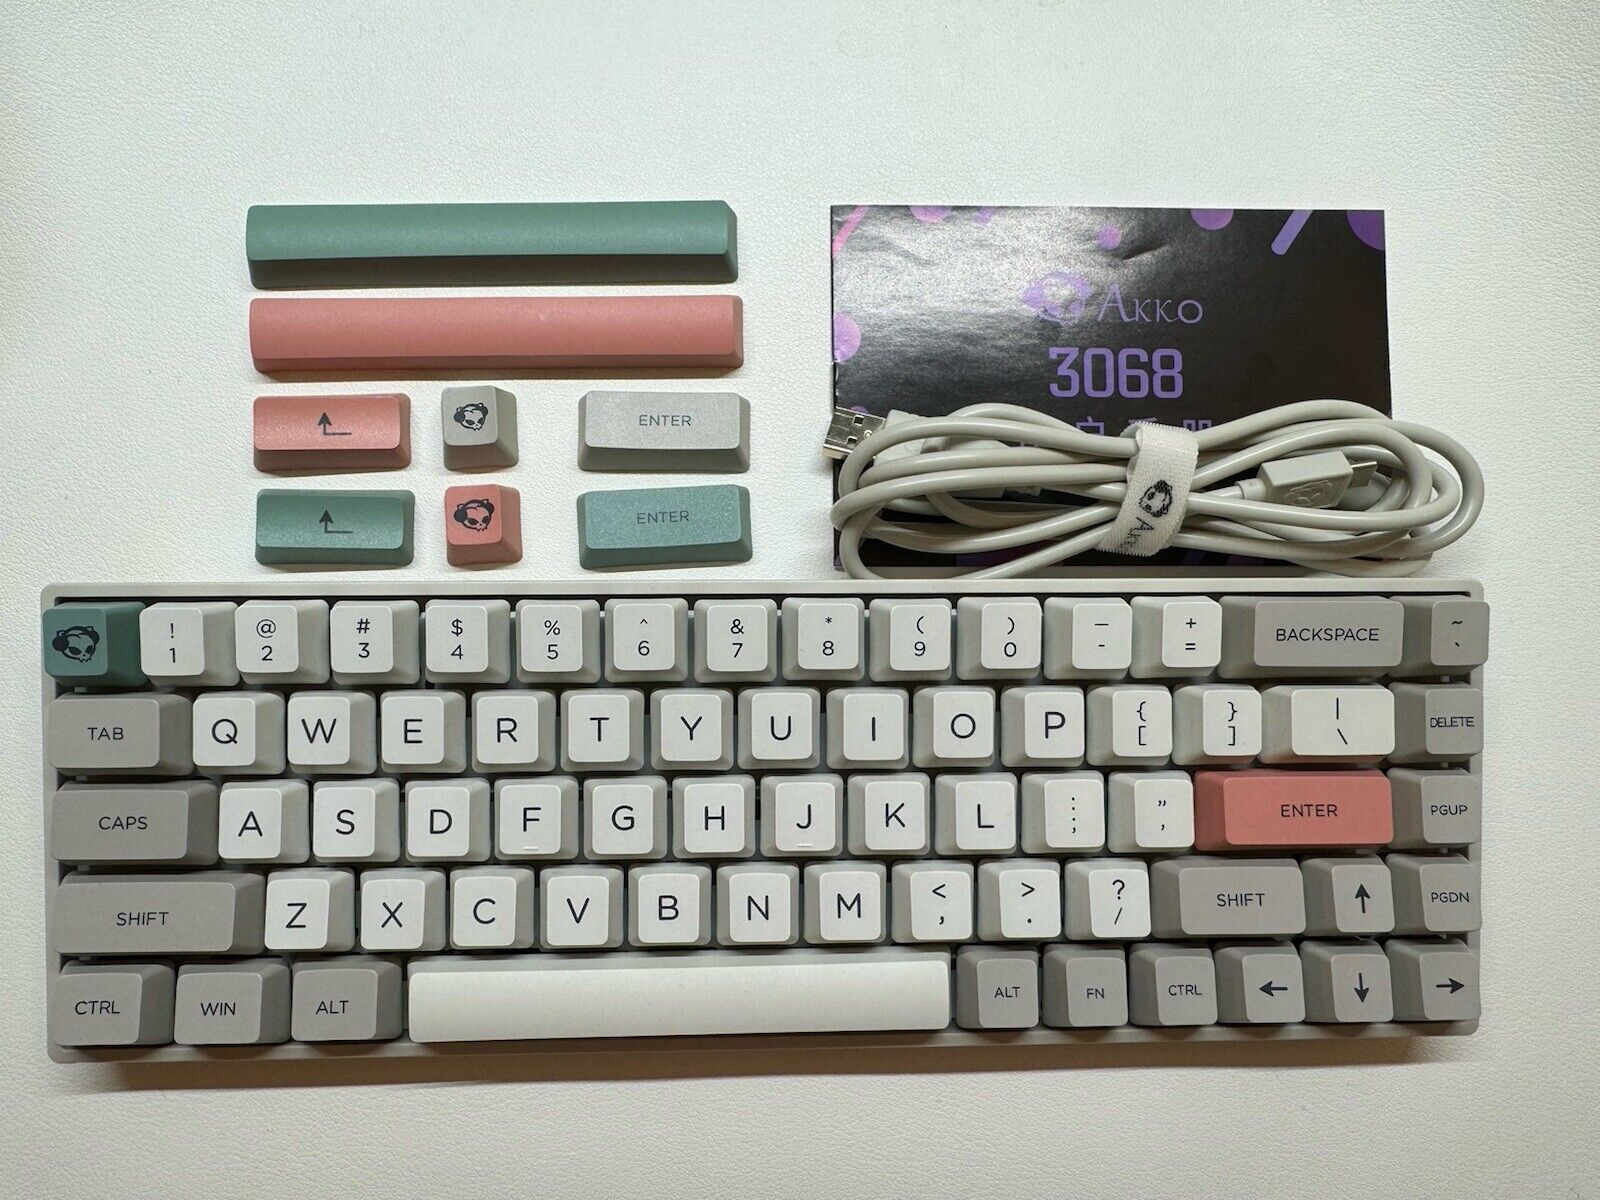 AKKO 3068 Retro - Cherry Brown Switches and Case and USB Cable Included